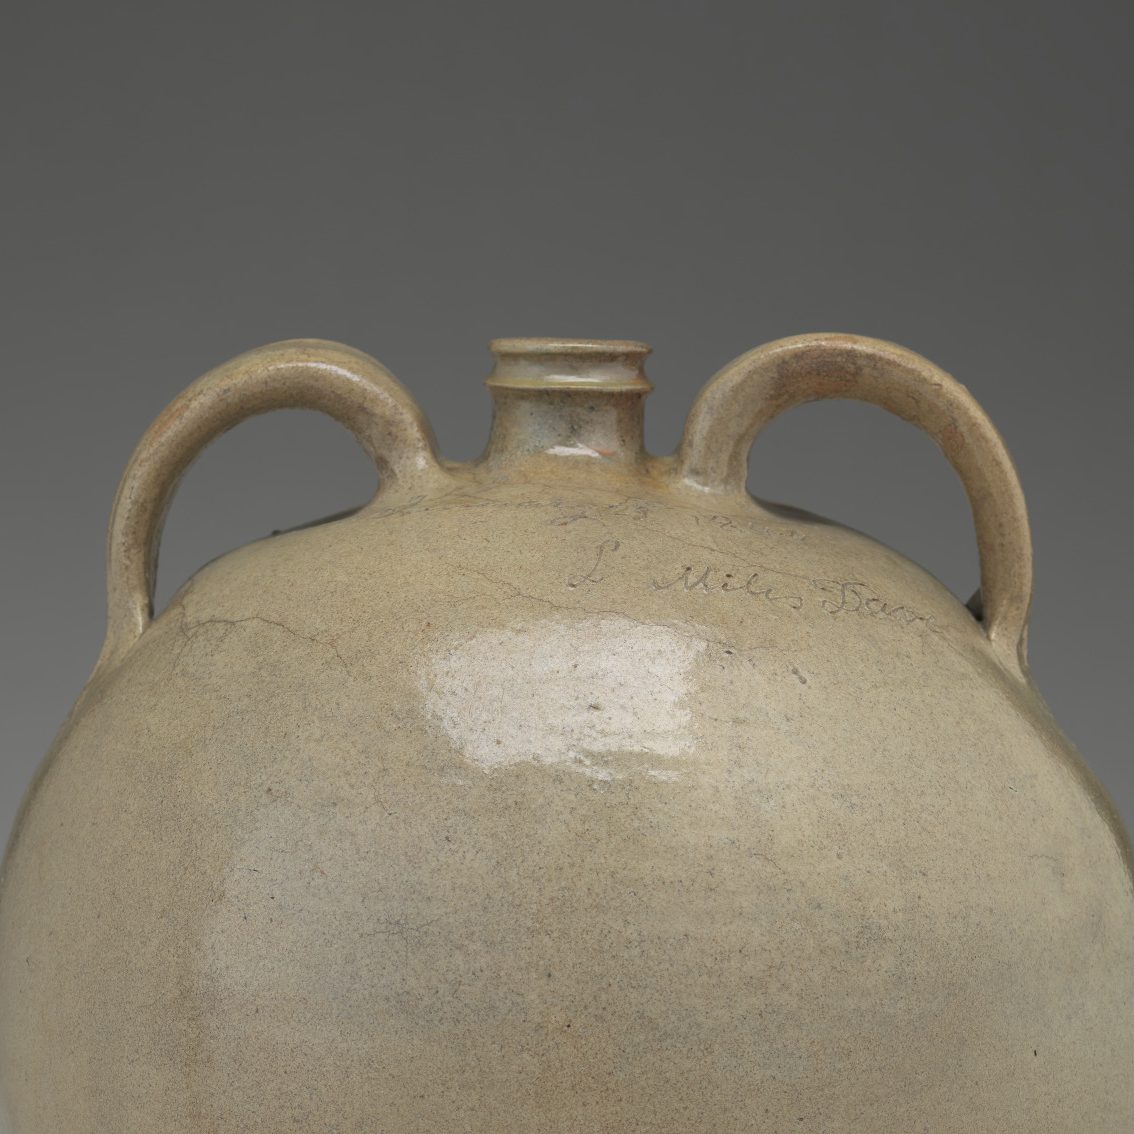 <p>American Galleries. </p>
<p>Imagine making this huge, two-handled jug out of a ball of clay. Even though this enslaved artist was told to make this, he took an opportunity and a risk to make it his own. How did he personalize this container? Have you ever taken a risk?</p>
